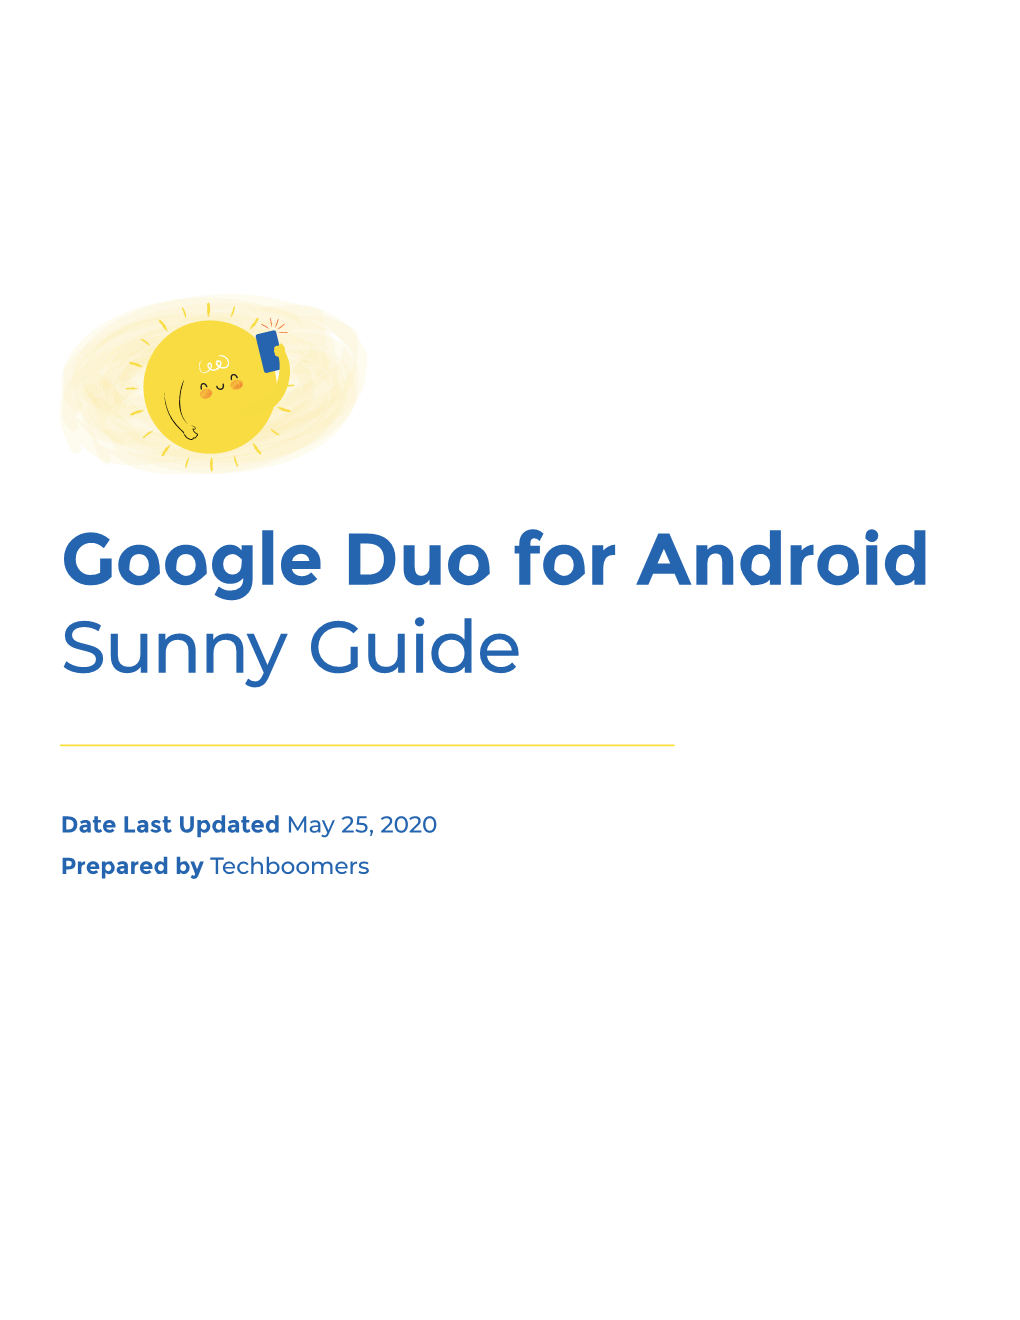 Google Duo for Android Sunny Guide